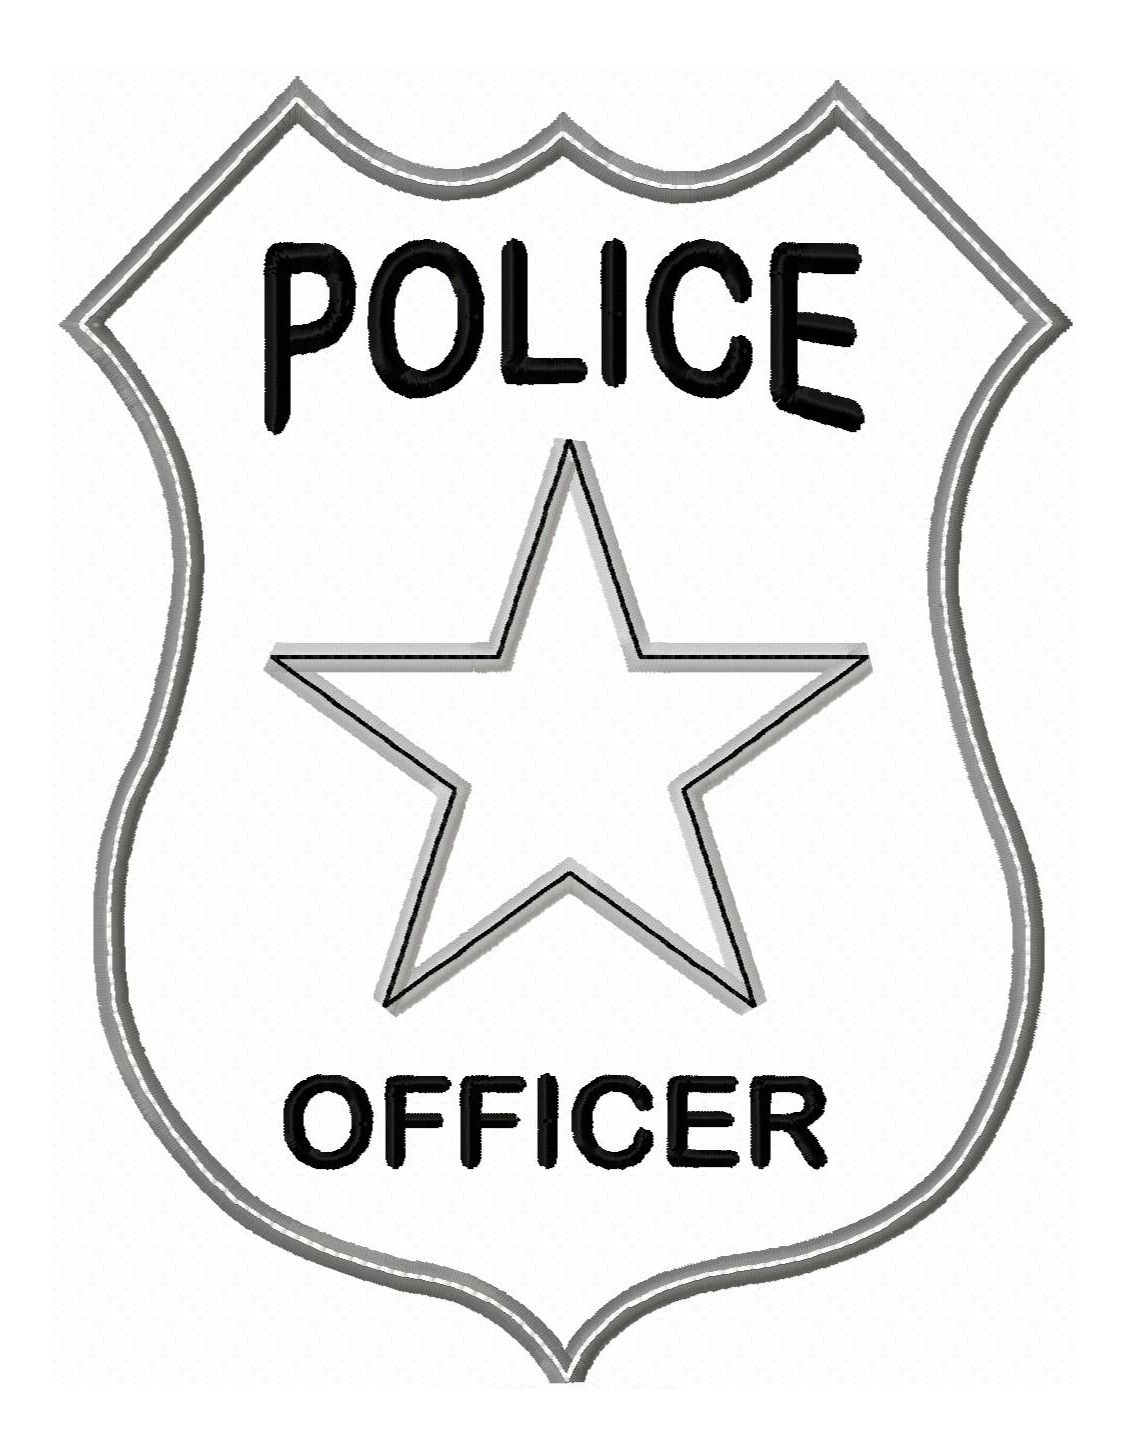 Policeman Hat Coloring Page - Coloring Pages for Kids and for Adults